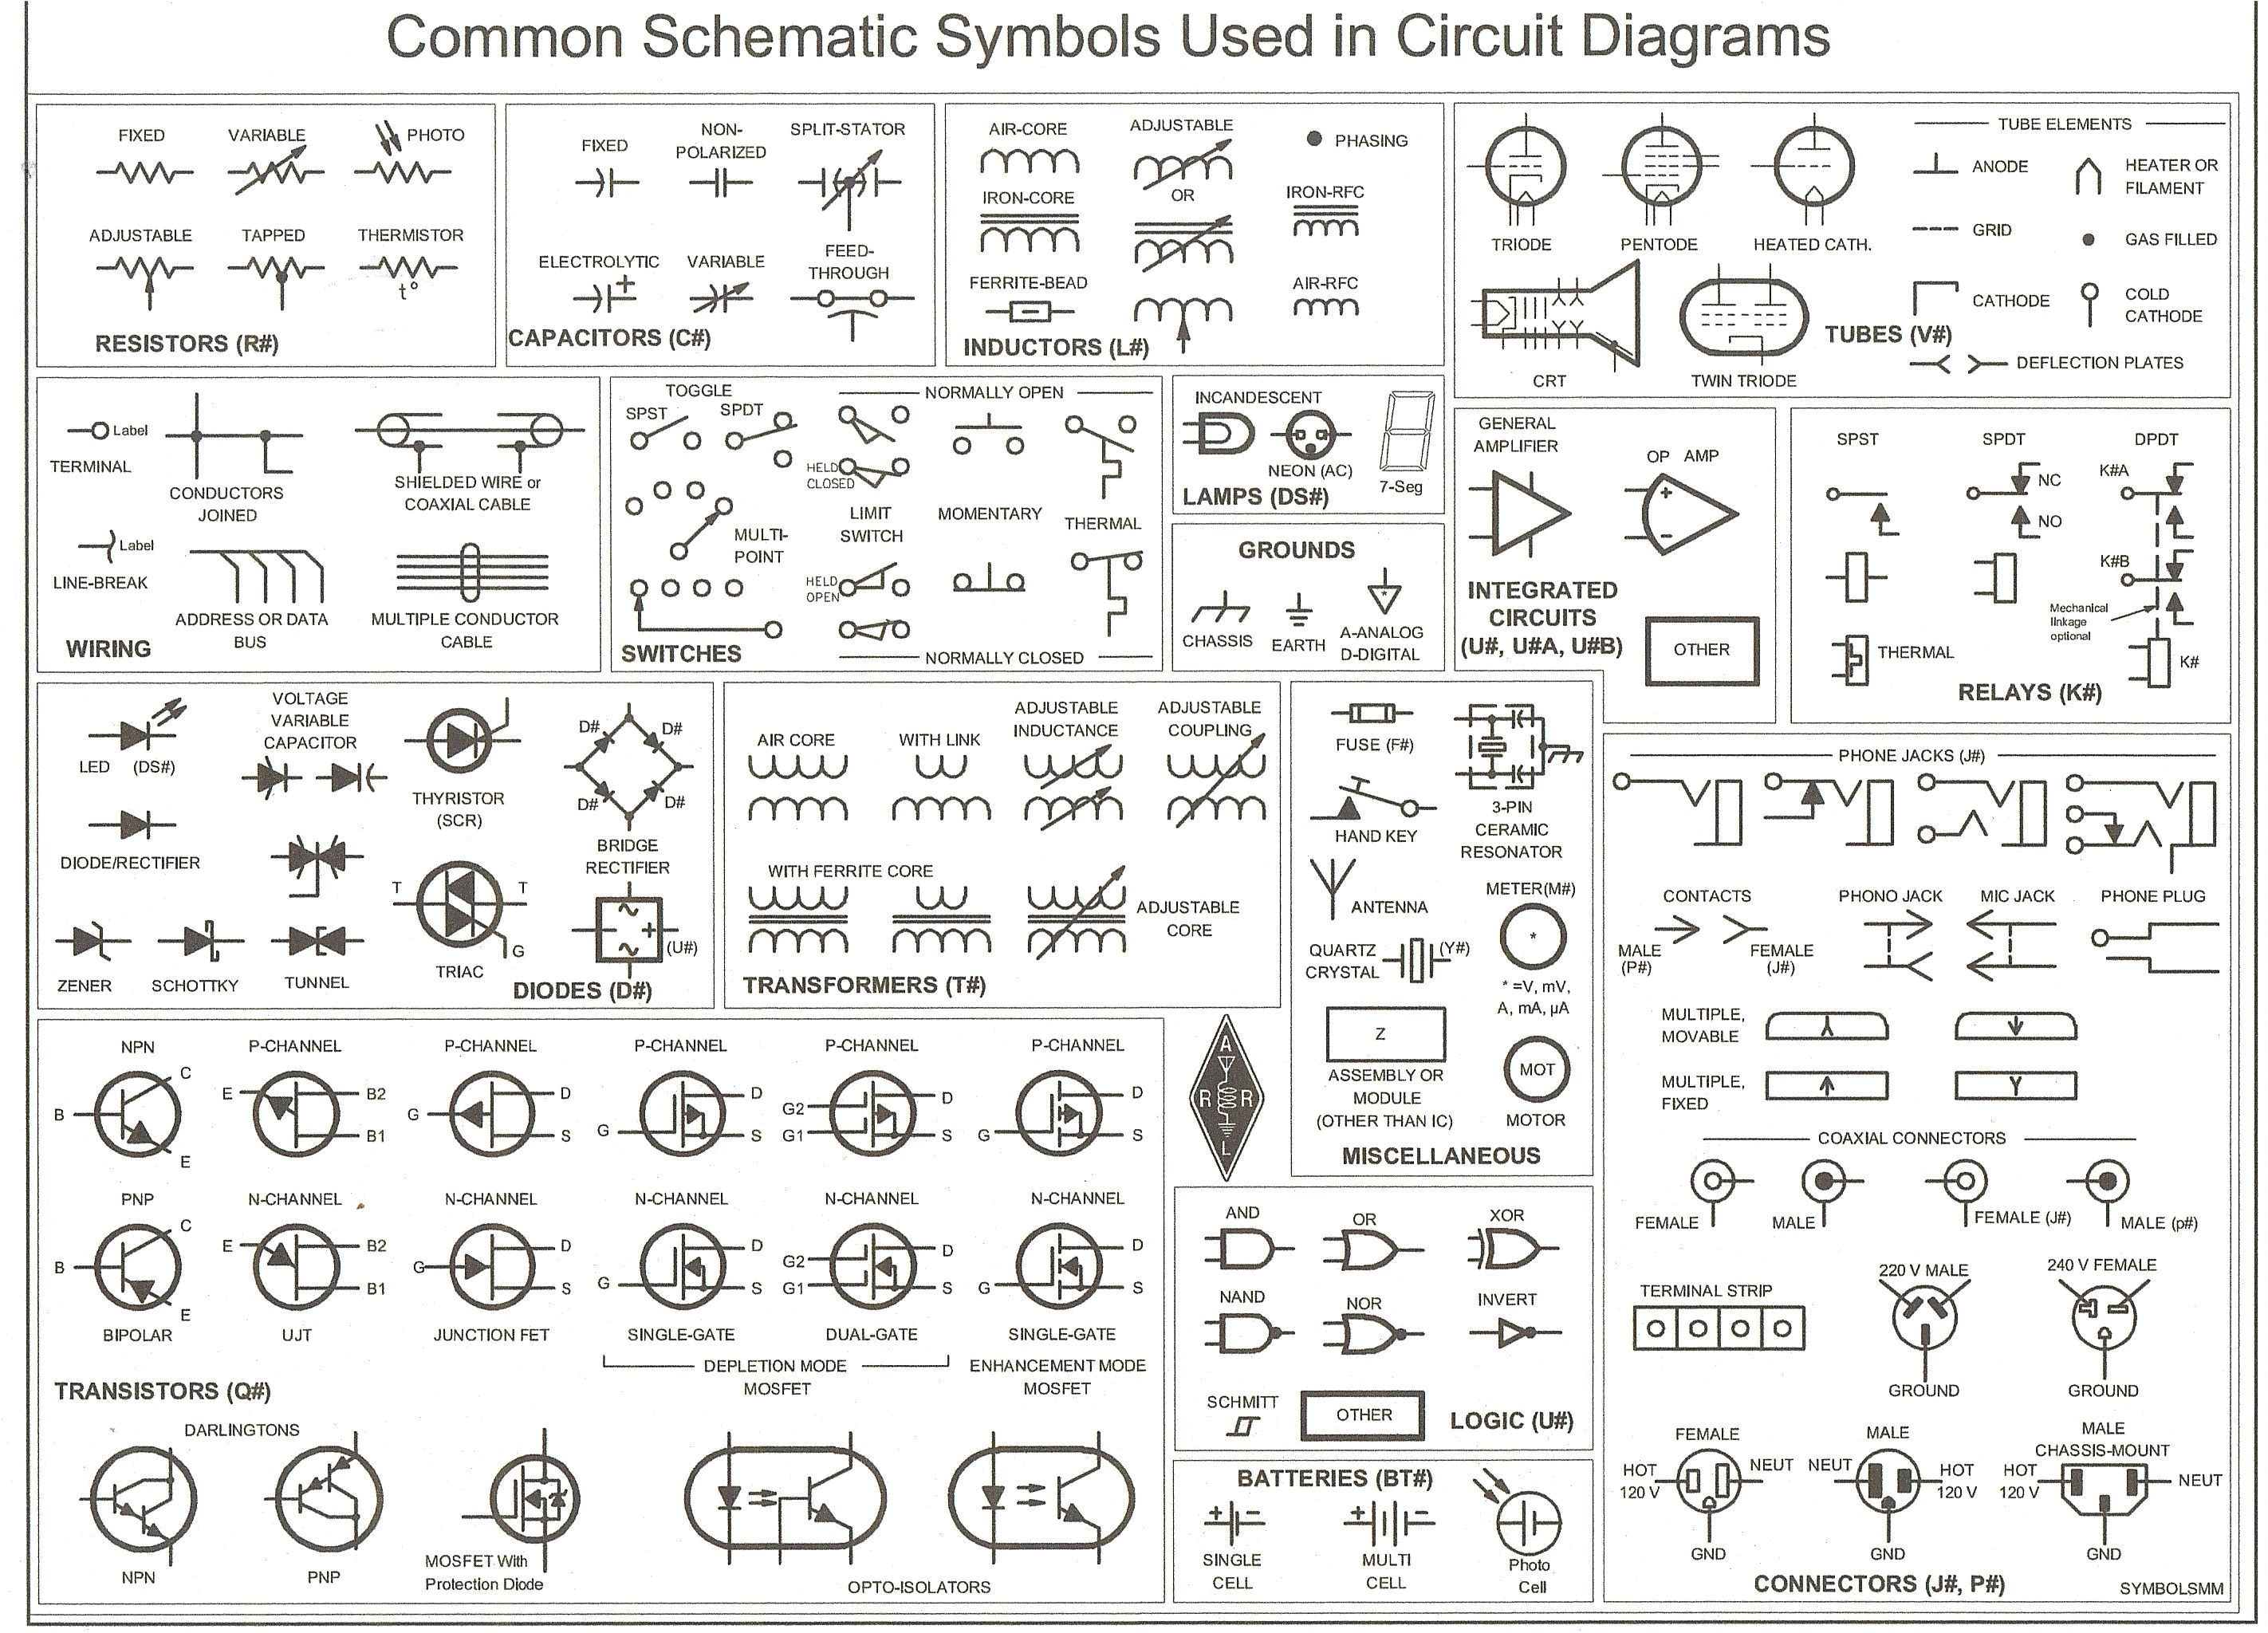 symbols abbreviations on electrical schematic symbols with wiring circuit diagram abbreviations